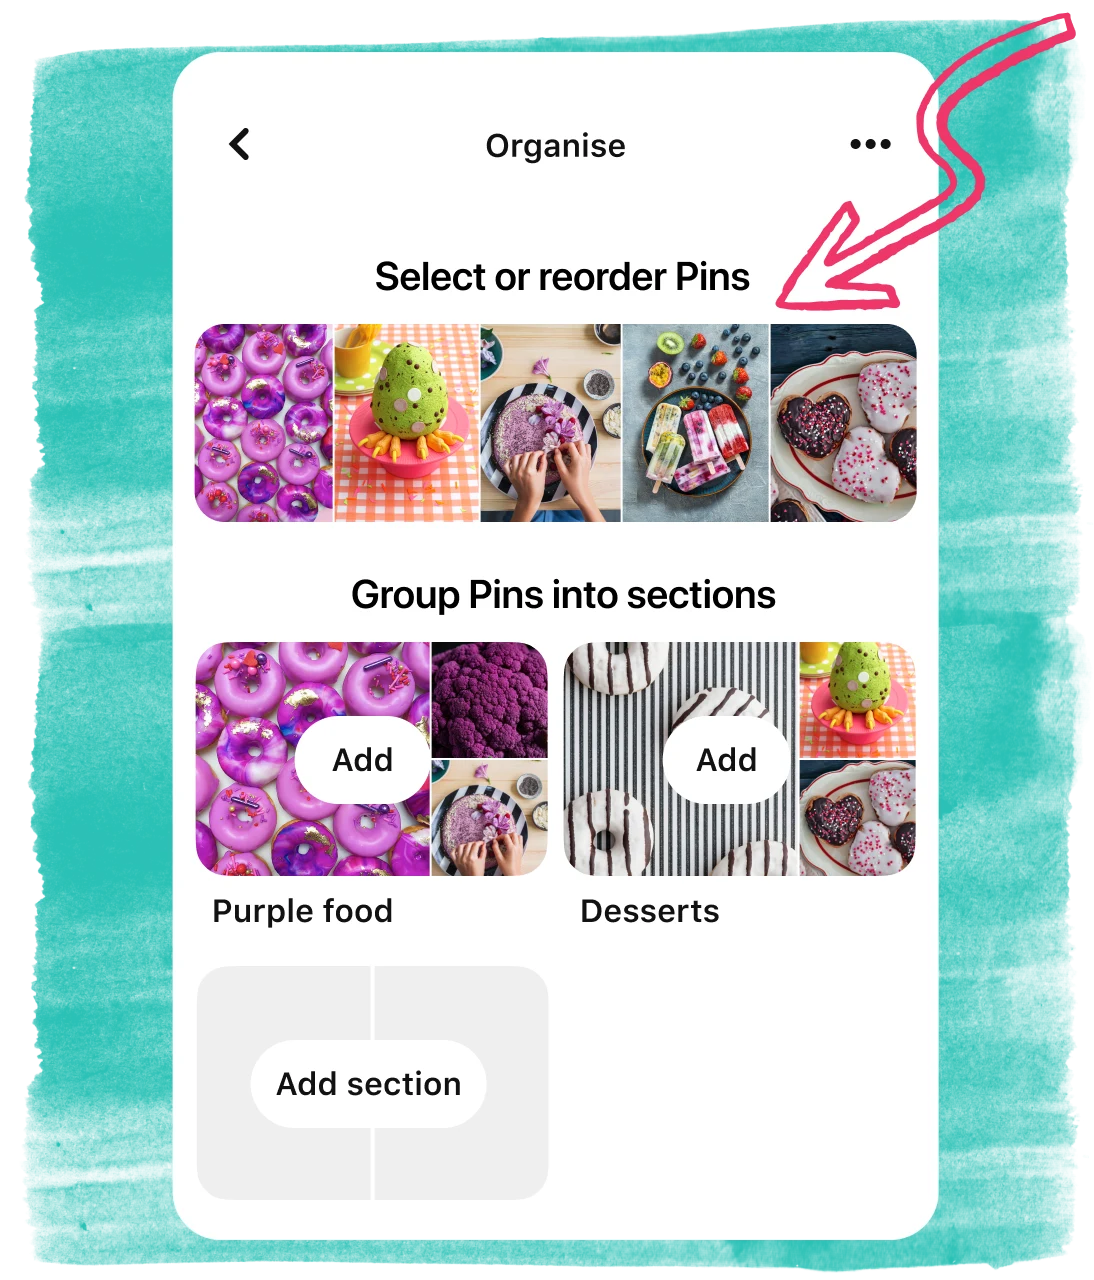 Organise boards page with a pink arrow pointing at the reorder/select Pins row